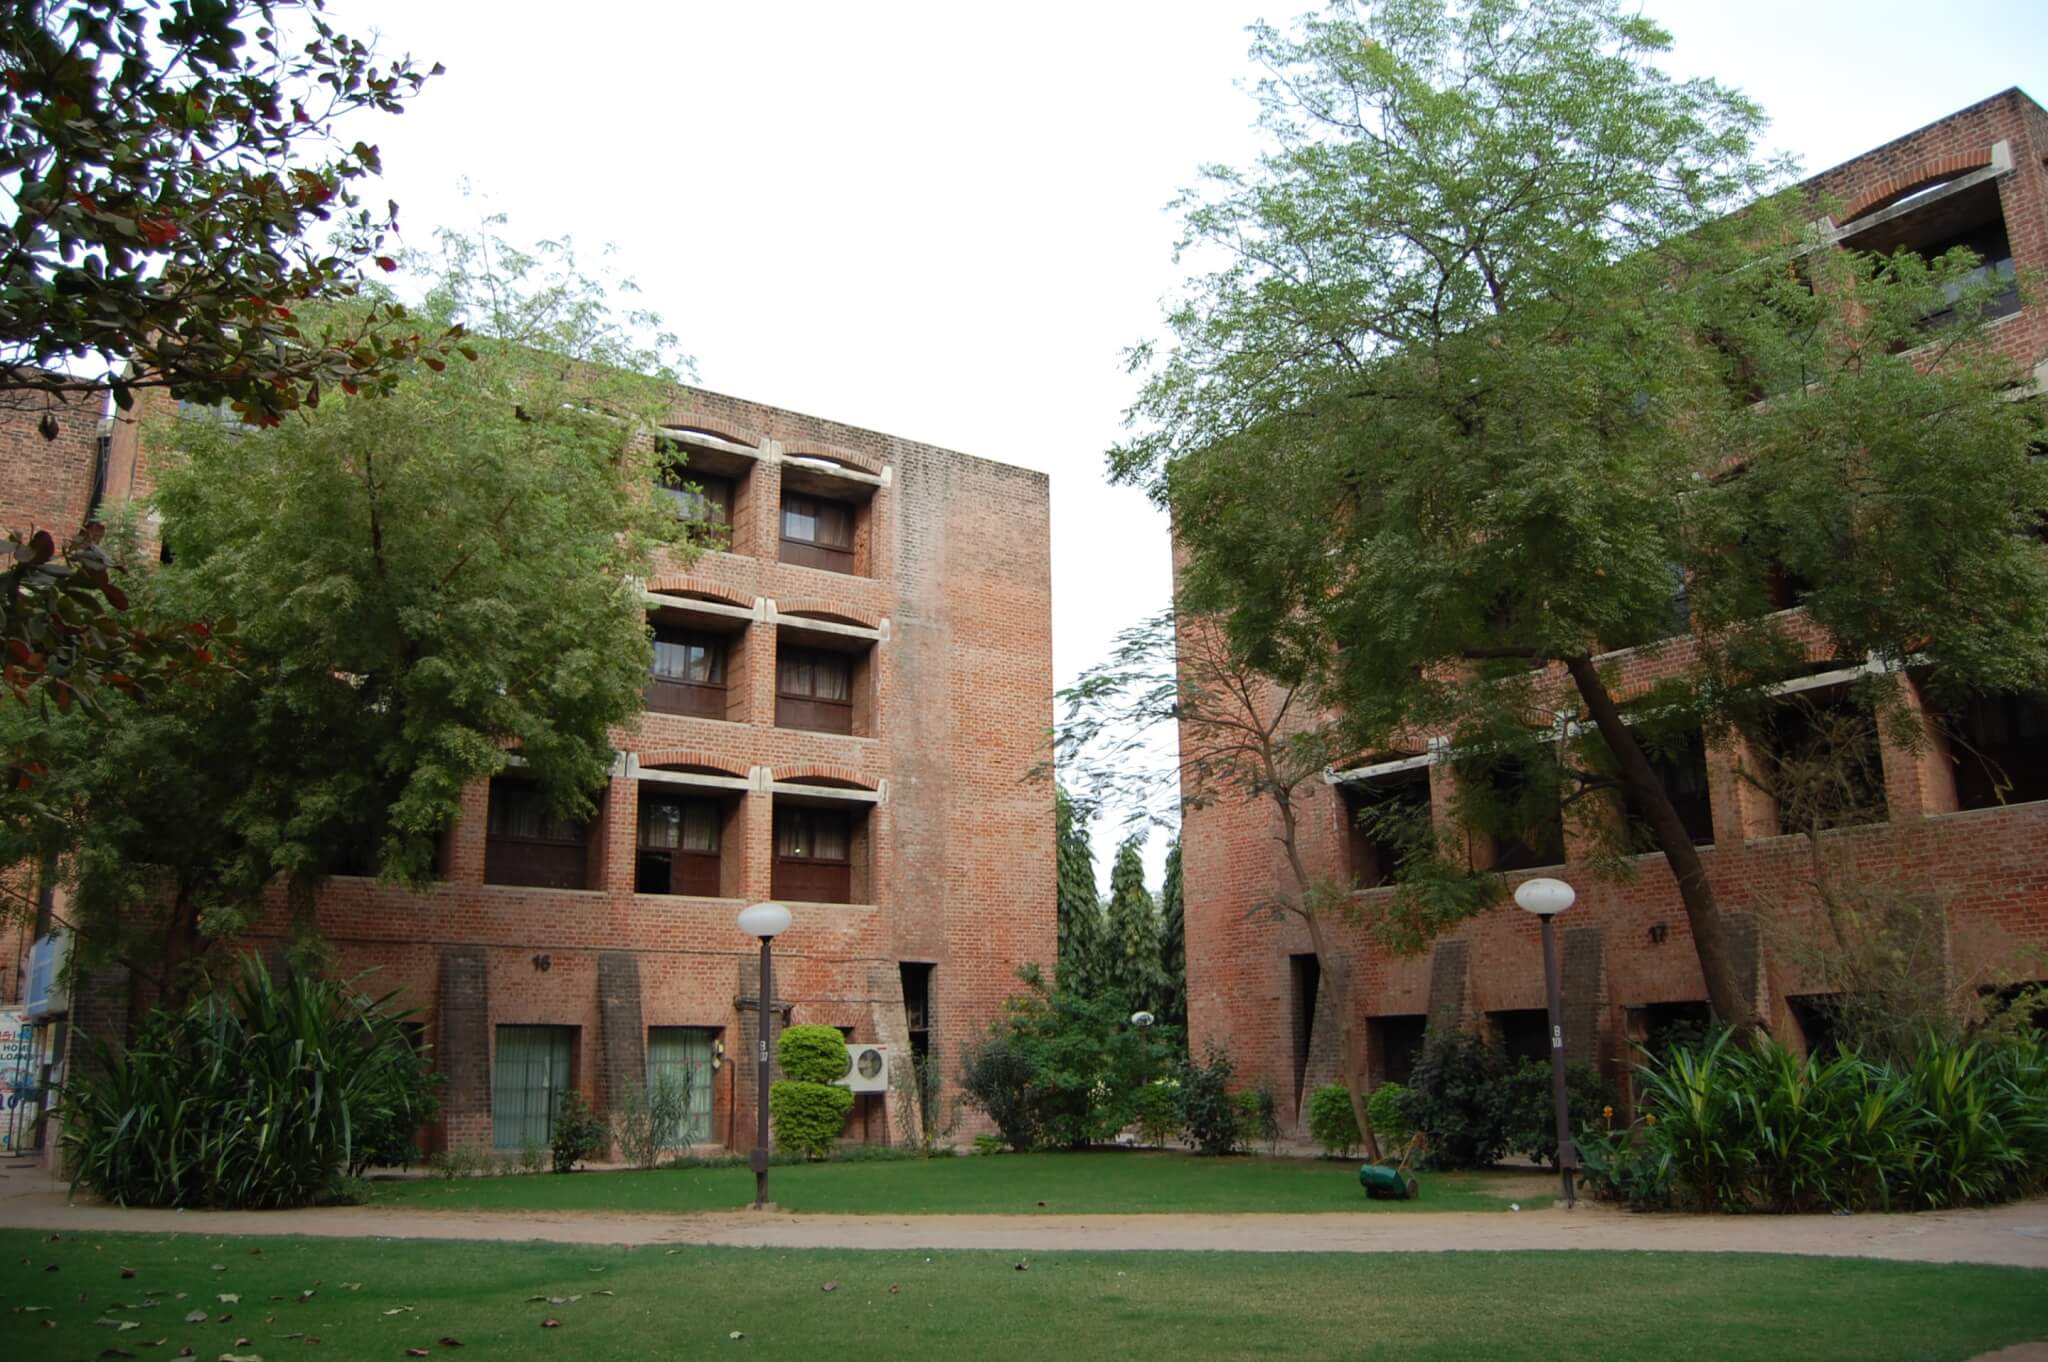 brick and concrete buildings showing wear in Ahmedabad, India